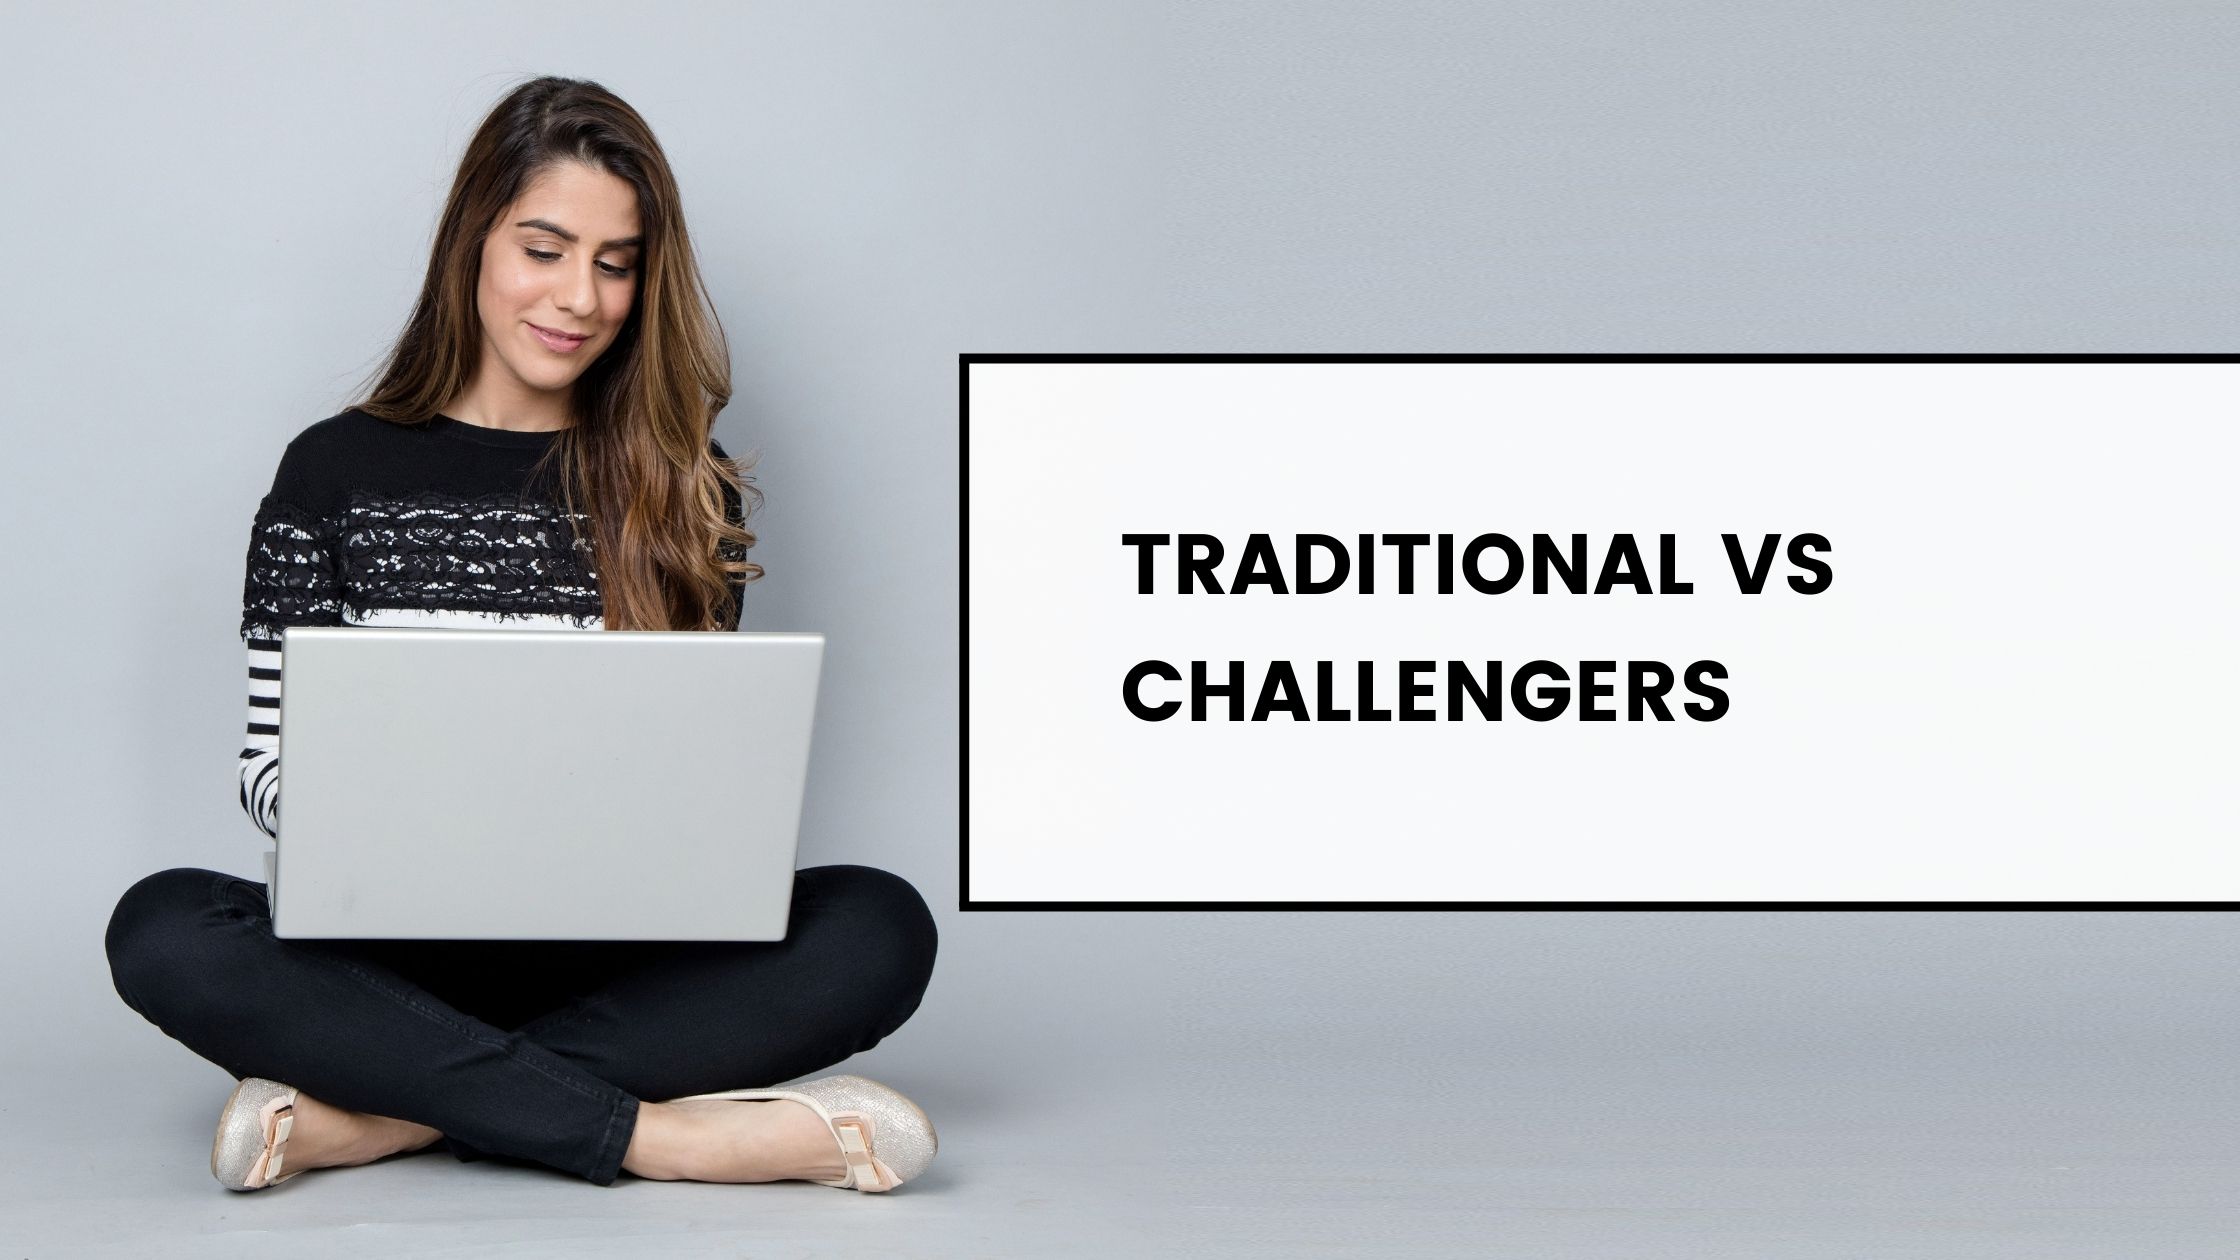 Traditional vs challengers